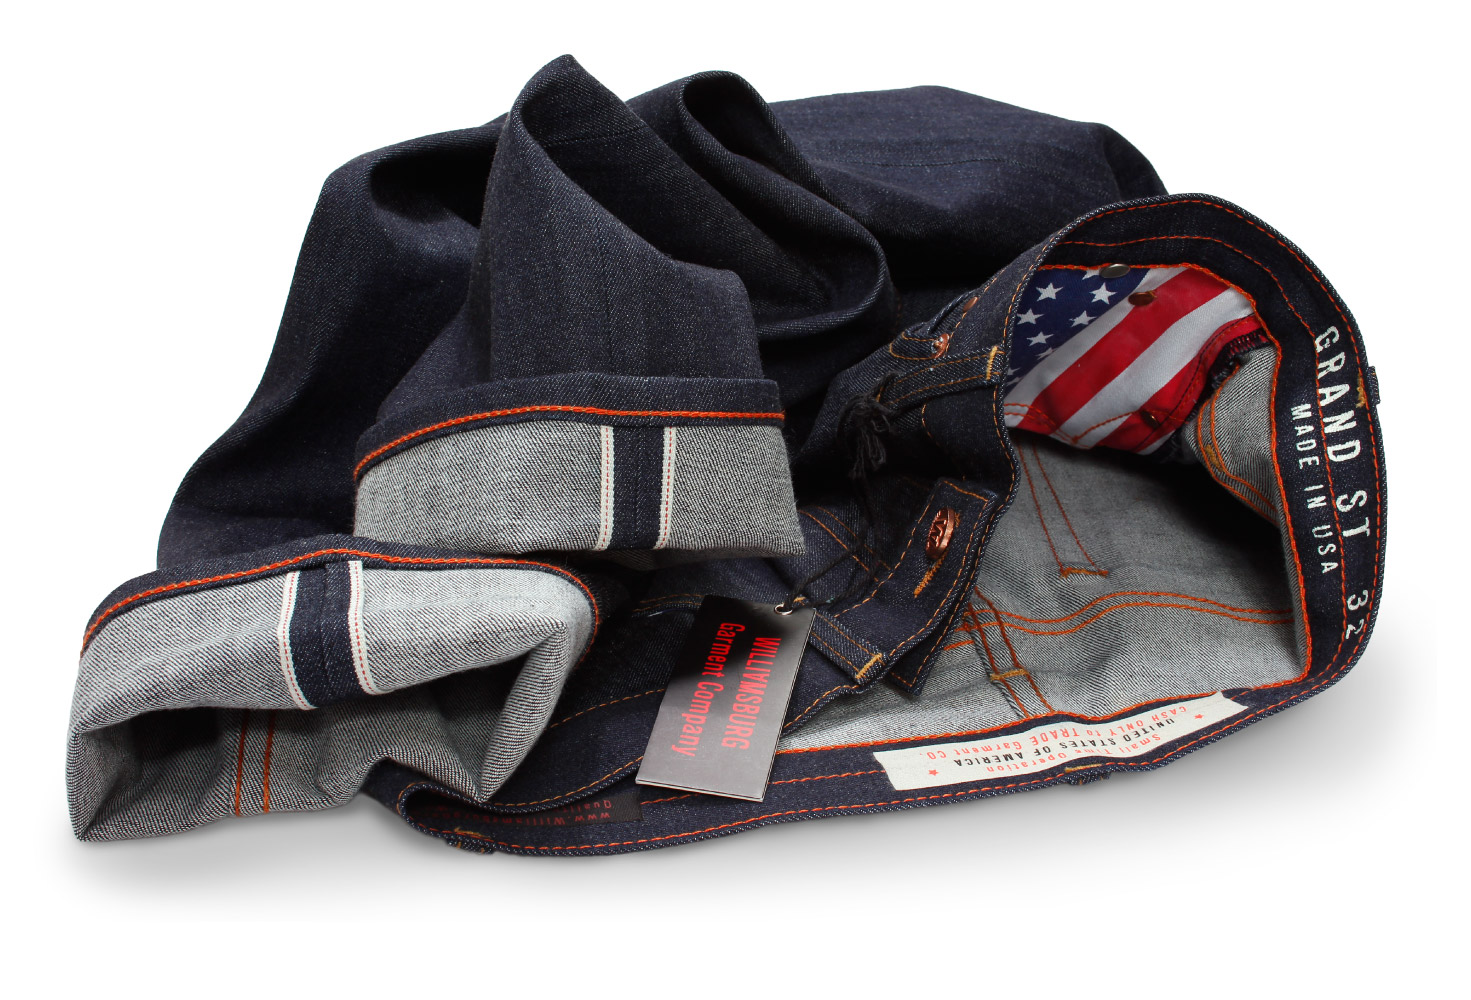 Williamsburg American-made selvedge raw denim jeans with flag pocket bags